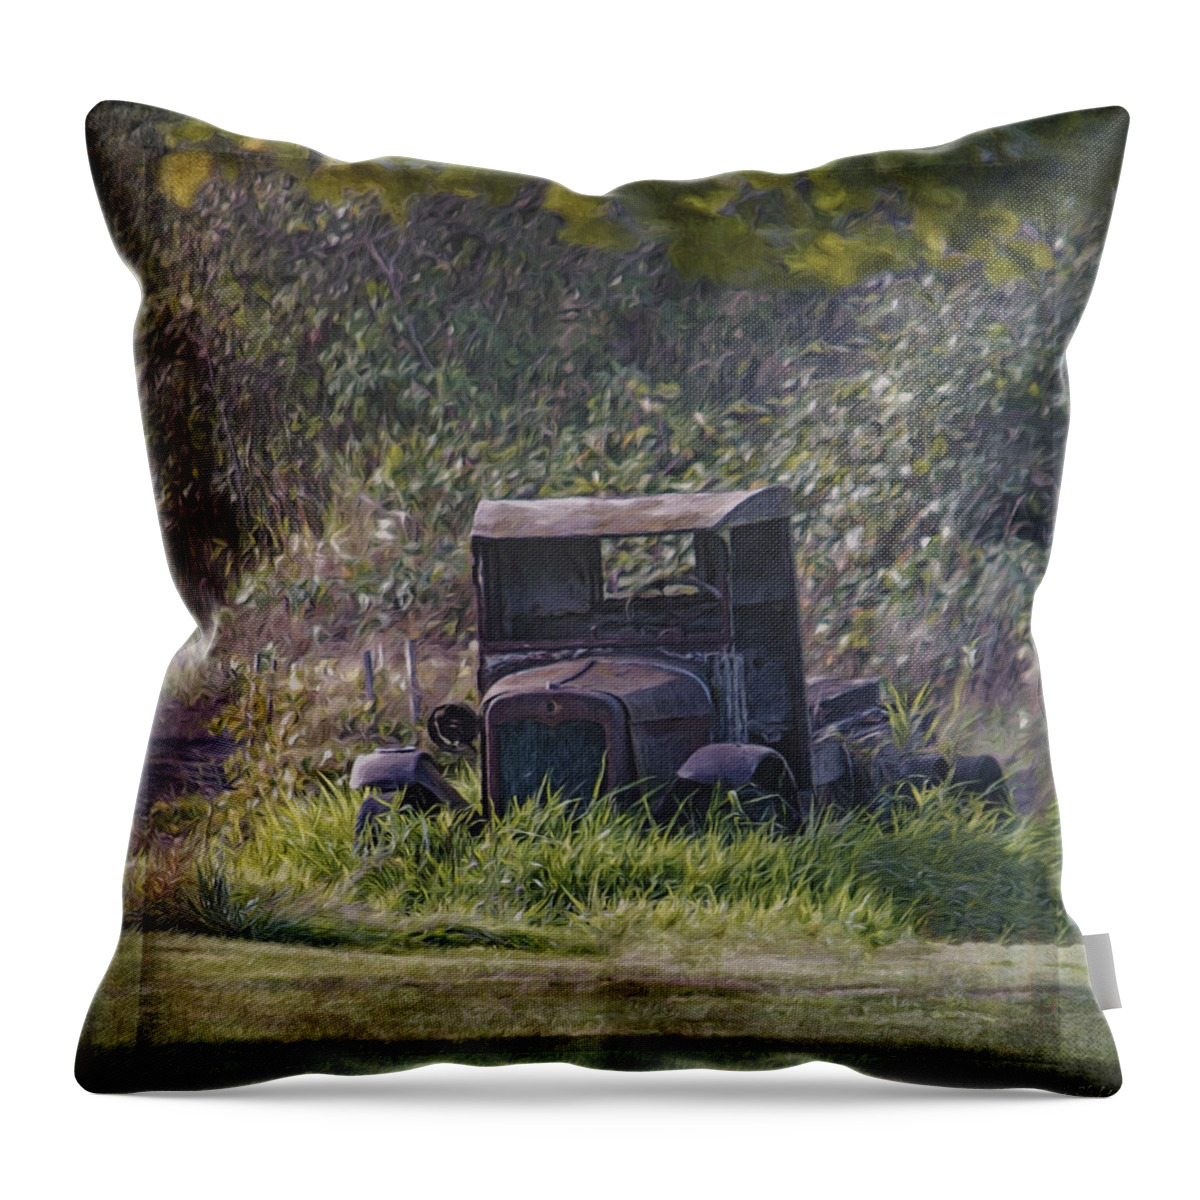 Put Out To Pasture Throw Pillow featuring the photograph Put Out To Pasture by Jordan Blackstone